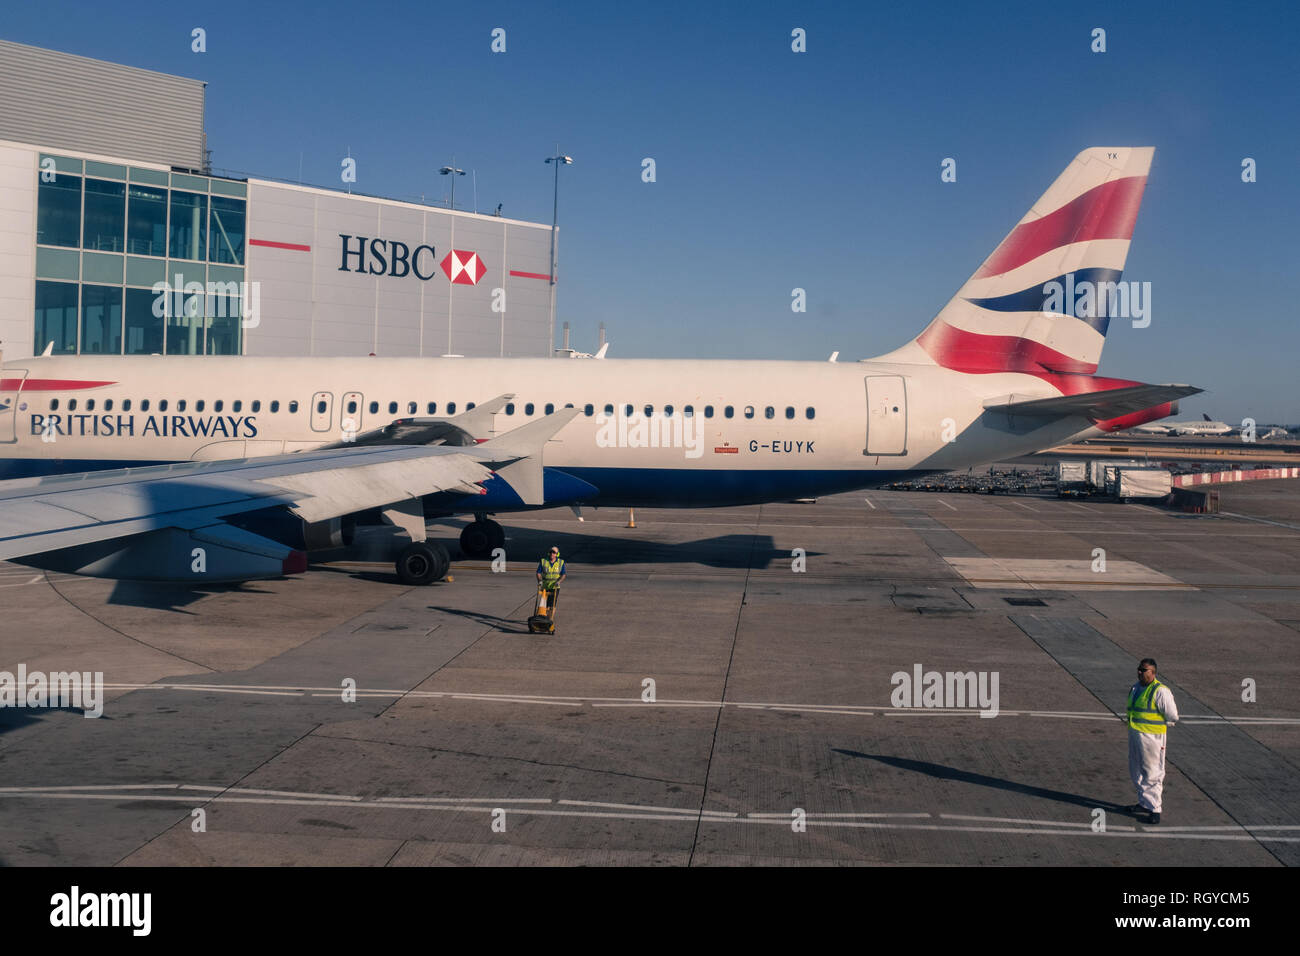 British Airways airplane on the tarmac outside an HSBC hanger on a sunny day Stock Photo